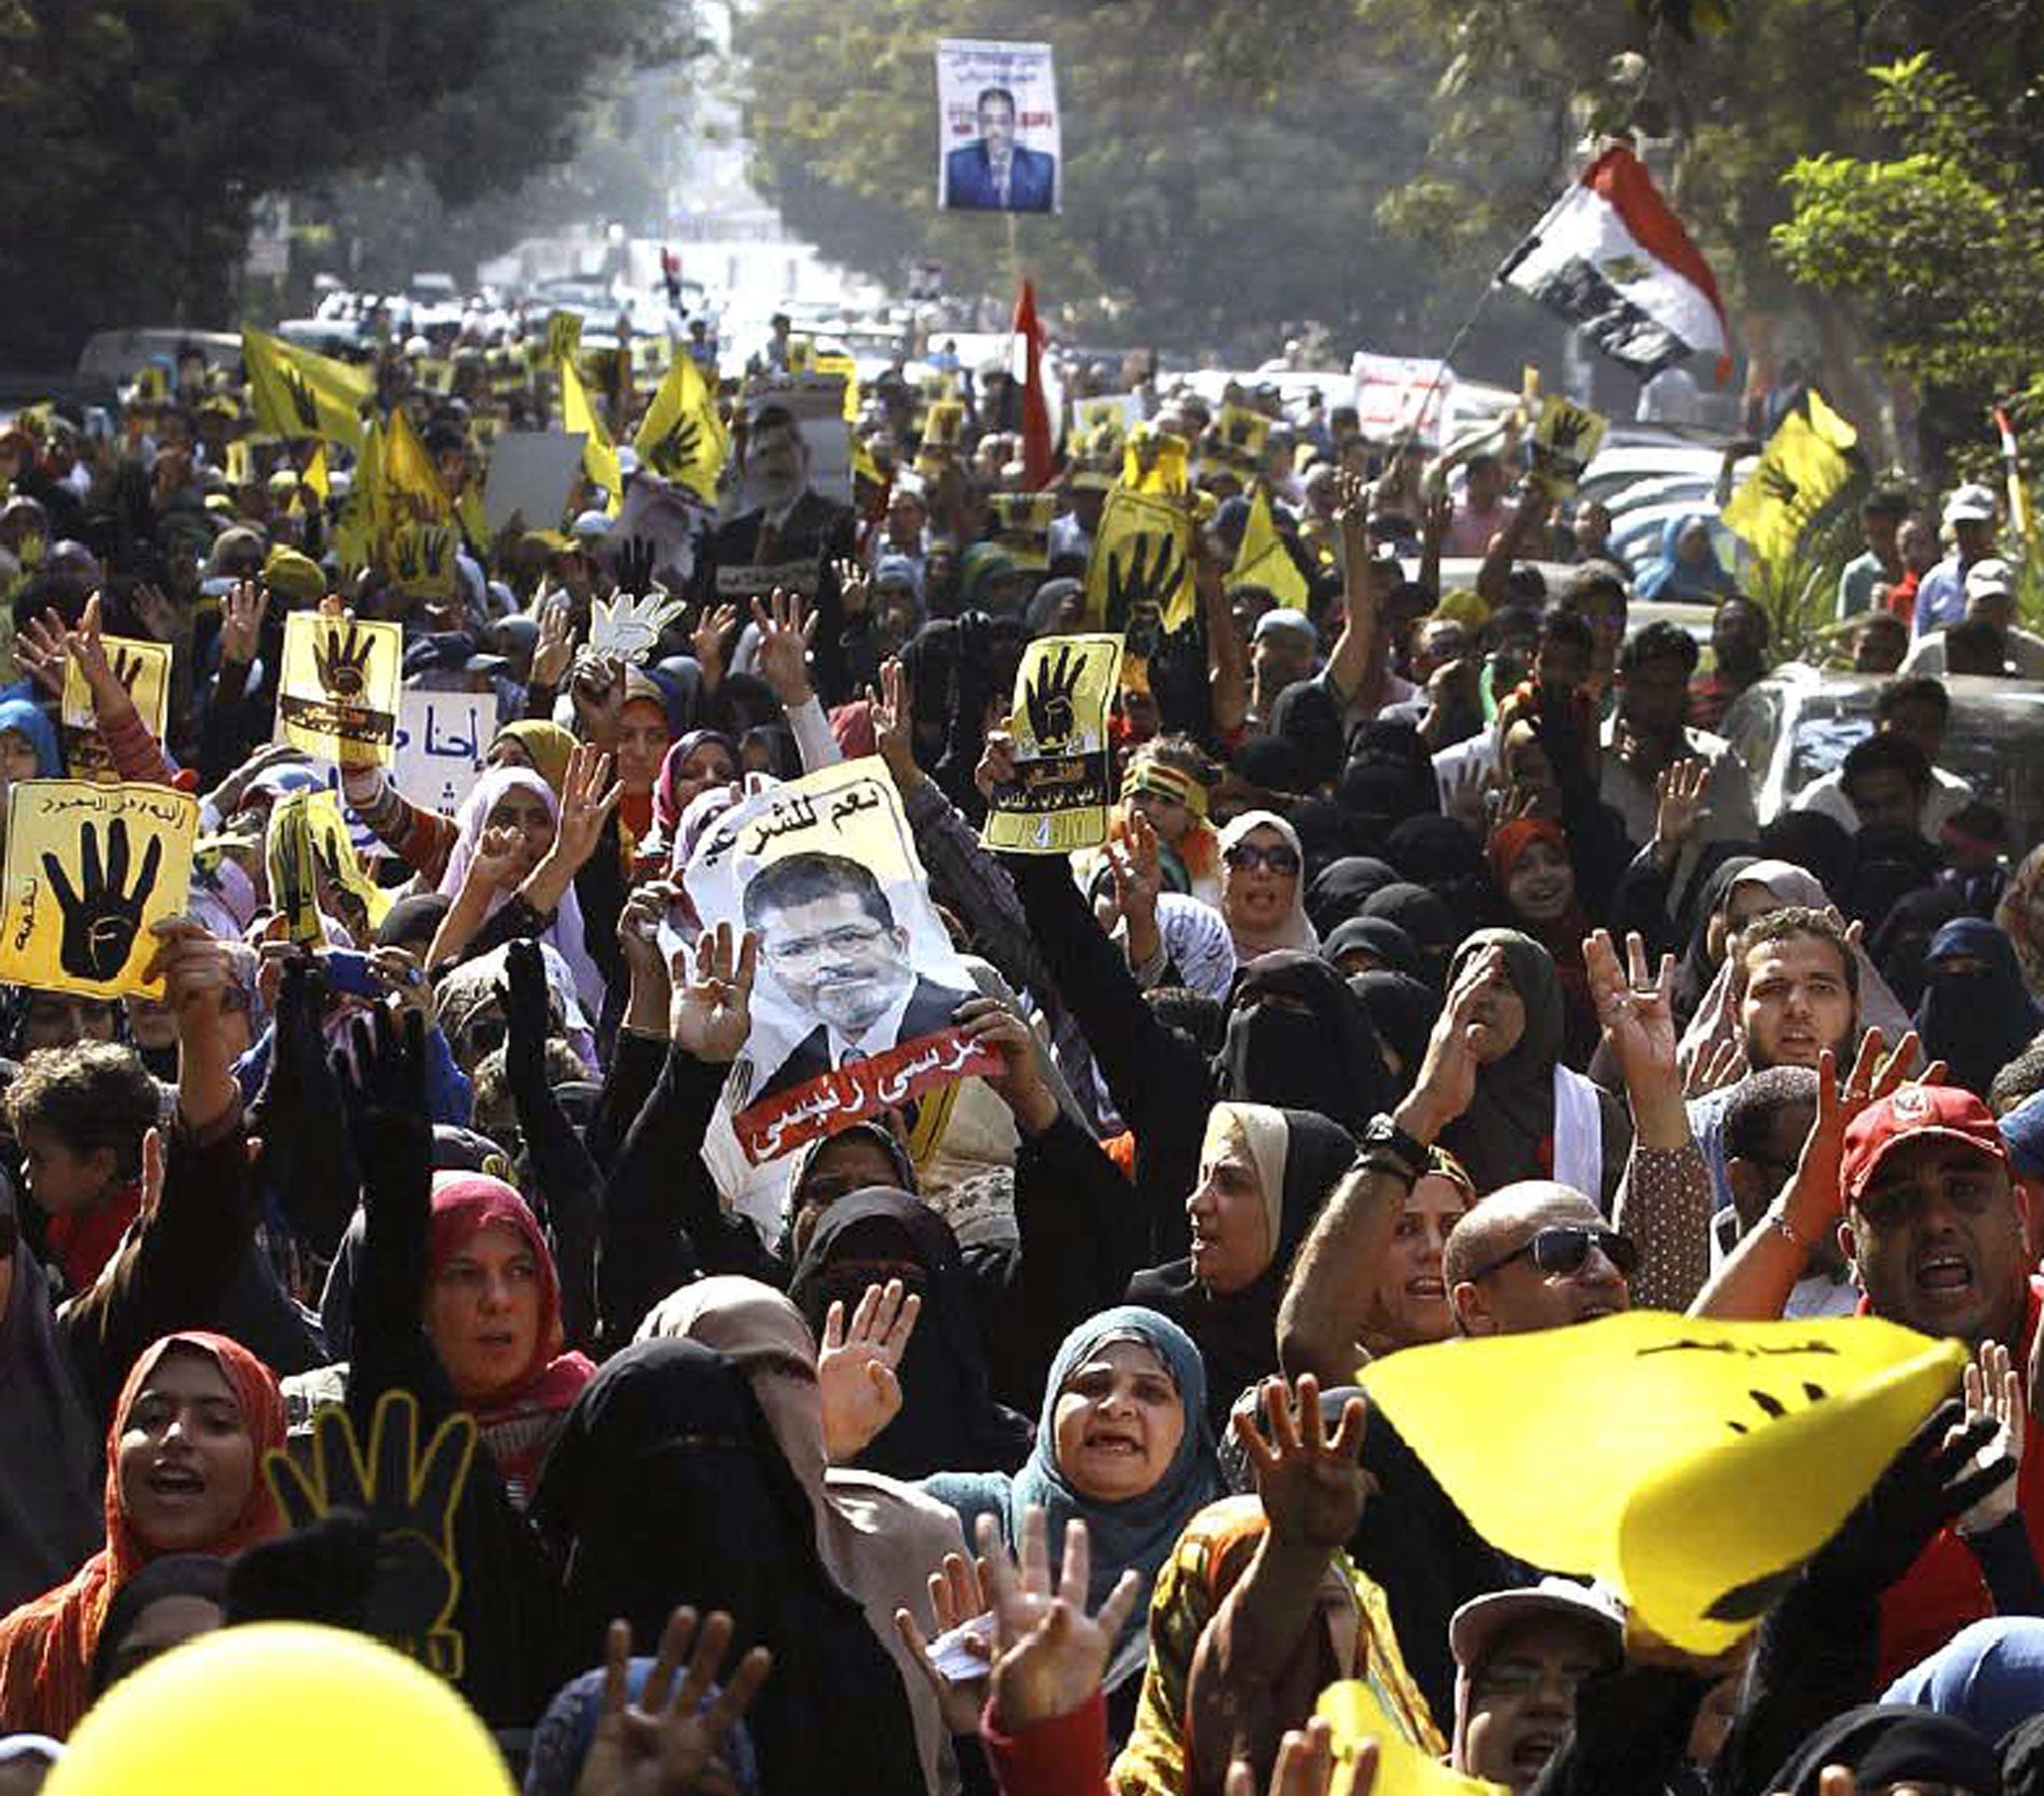 Supporters of Mohamed Morsi, below, are gather expected to gather today in protest